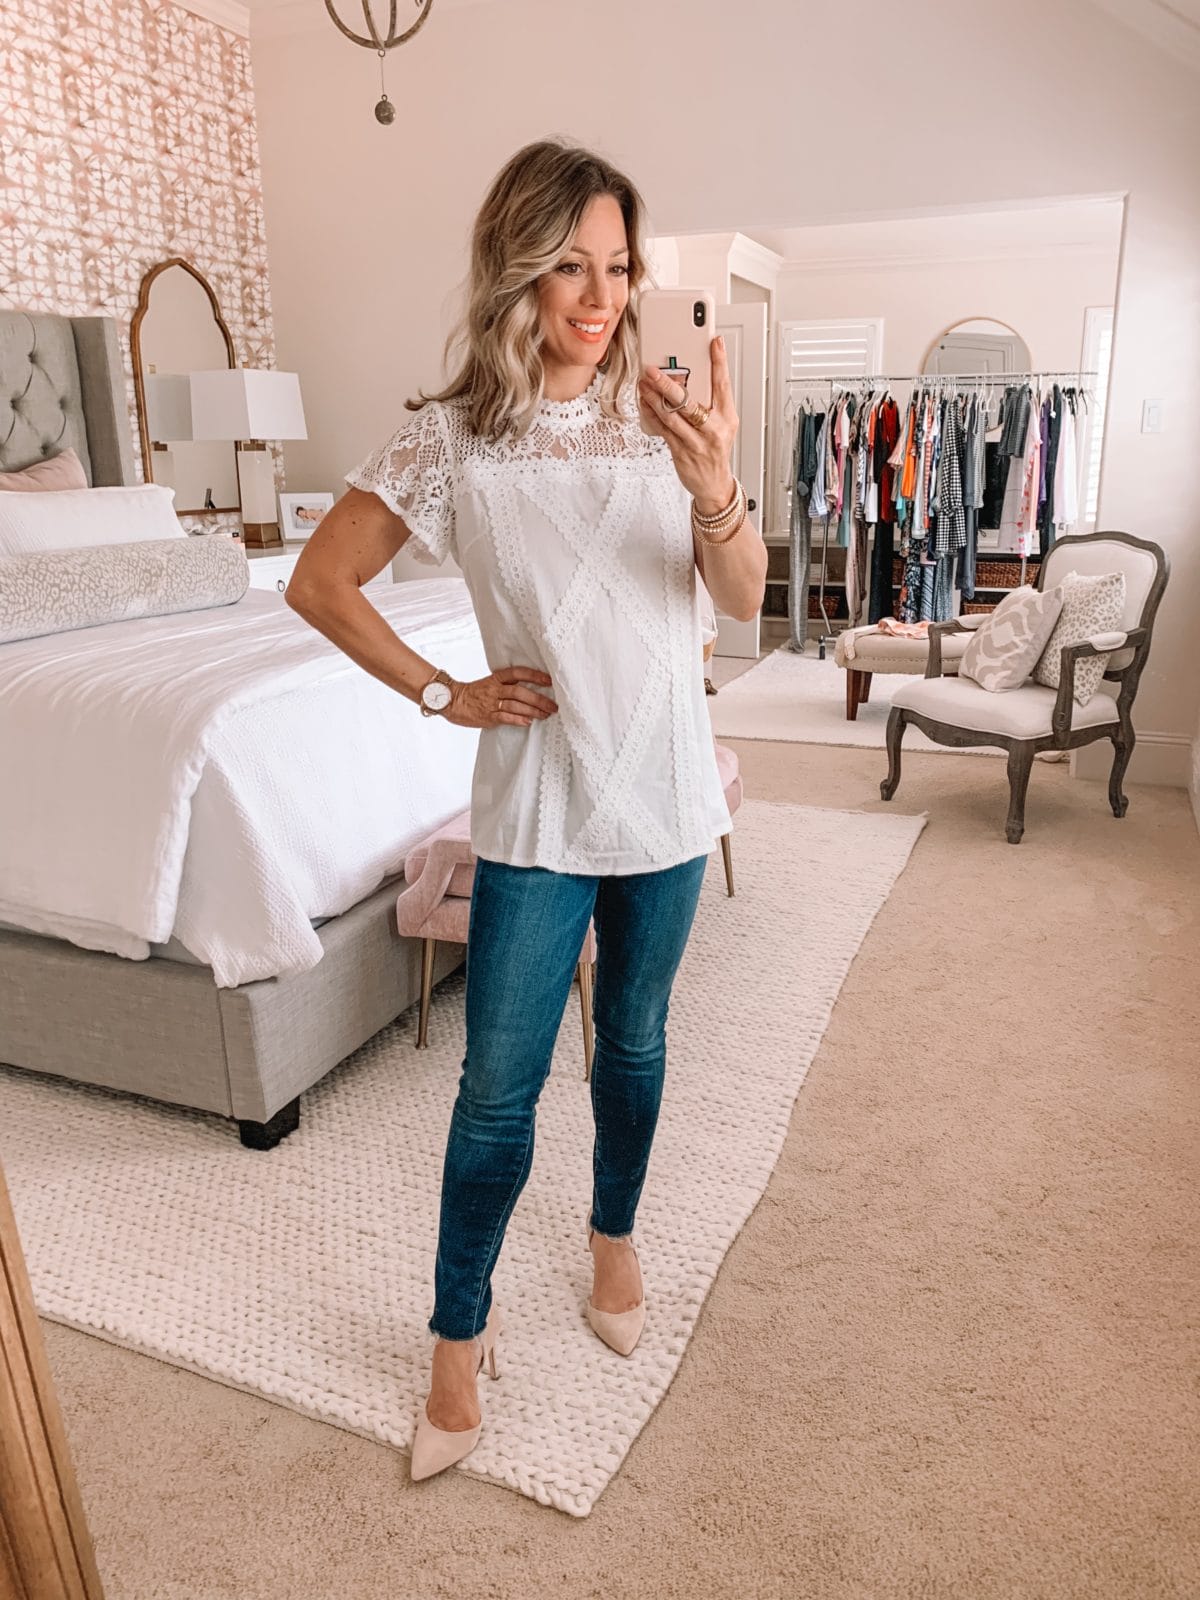 Amazon Fashion Finds, Lace Top, Skinny Jeans, Heels 